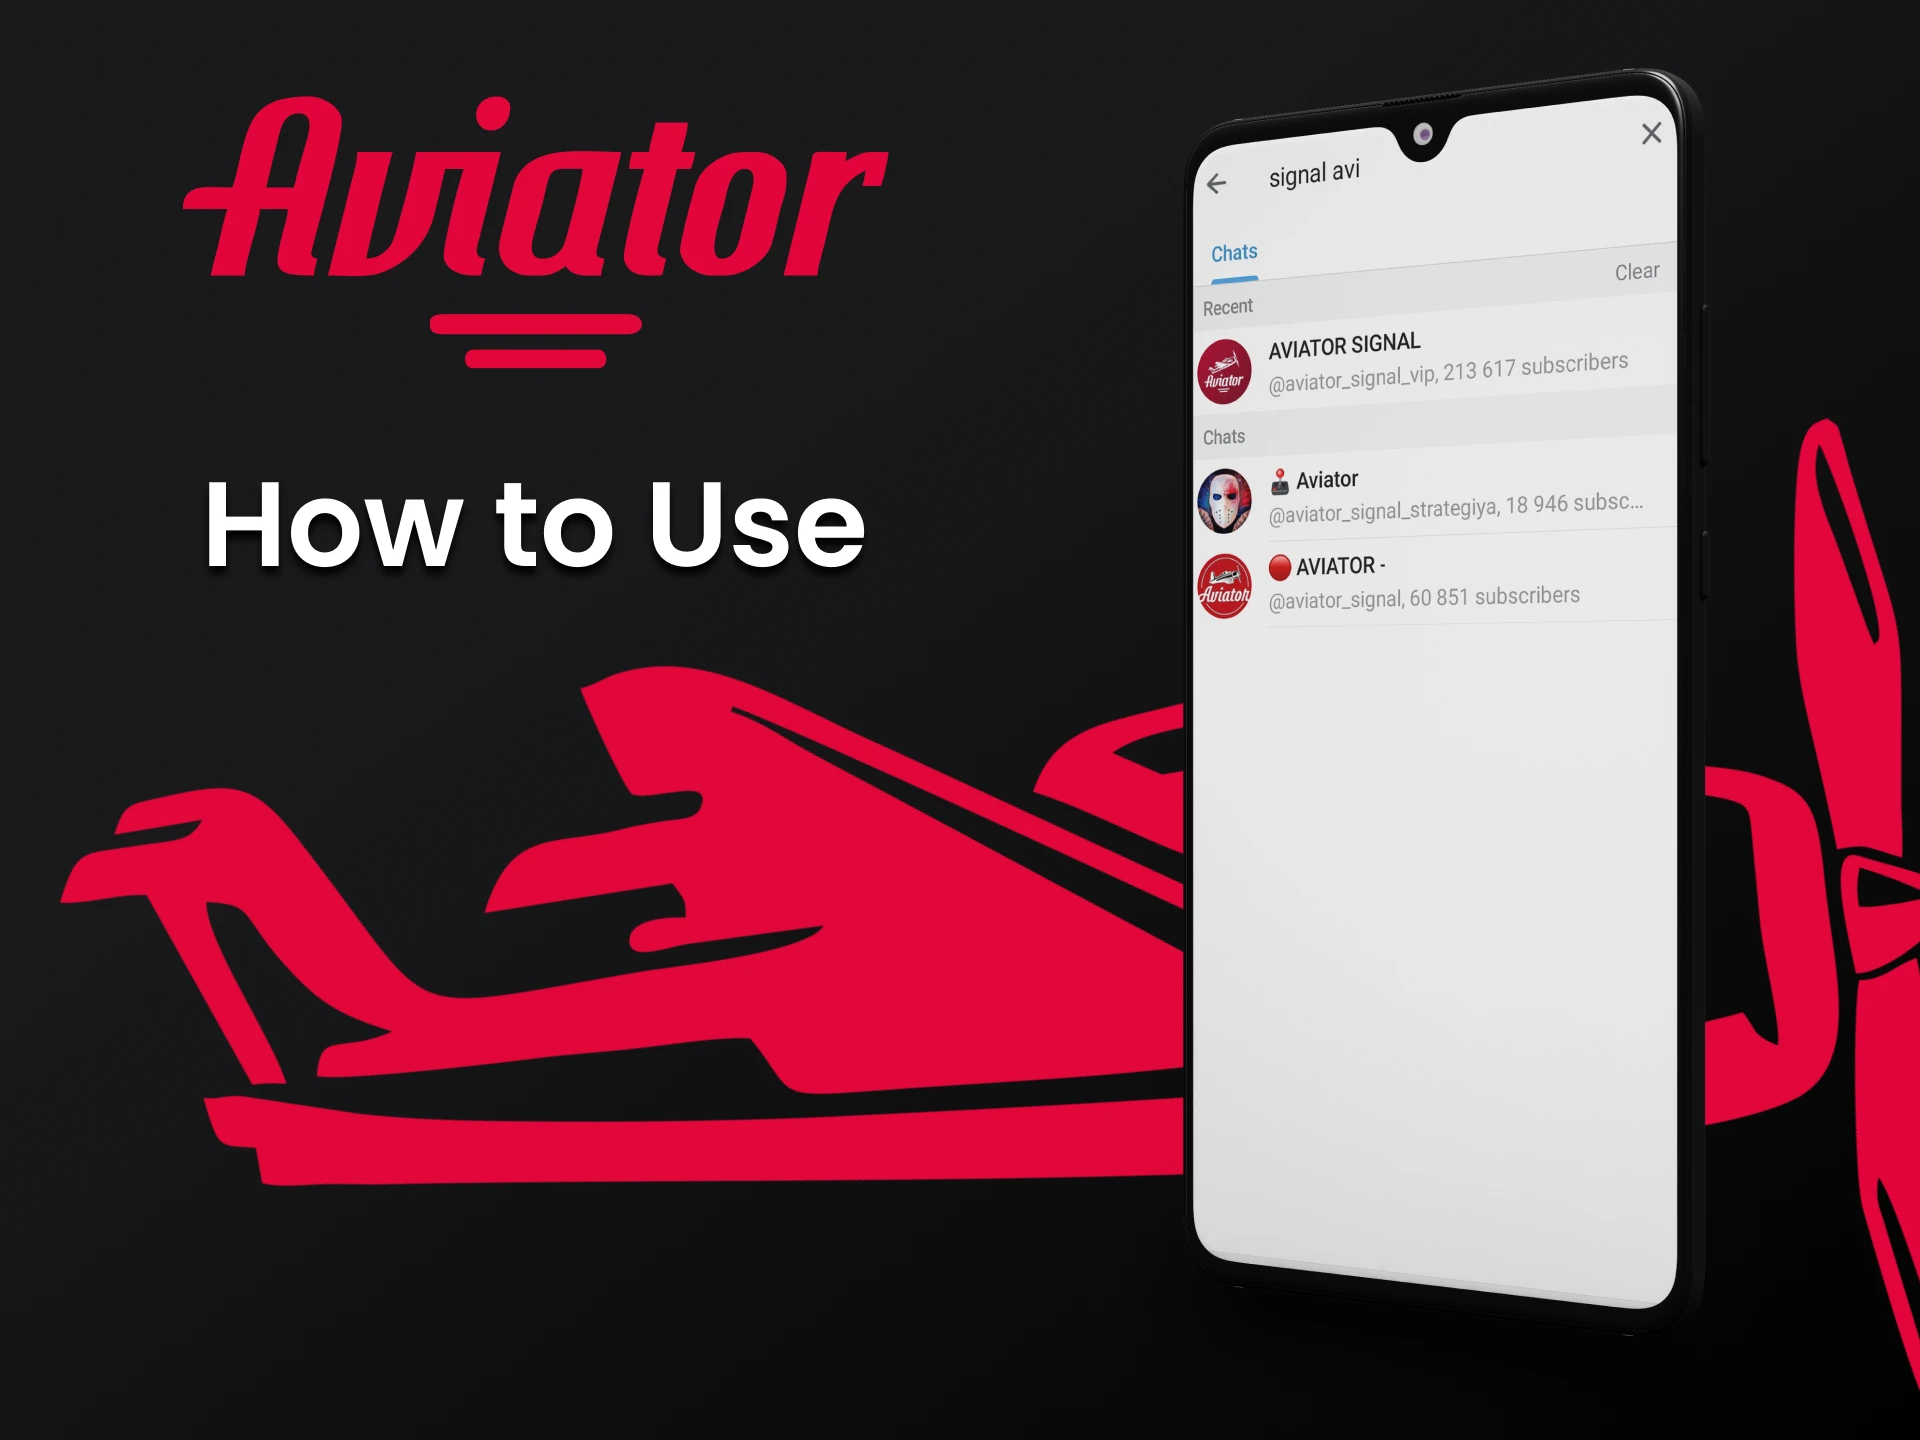 Take just a few steps to increase your wins in Aviator.